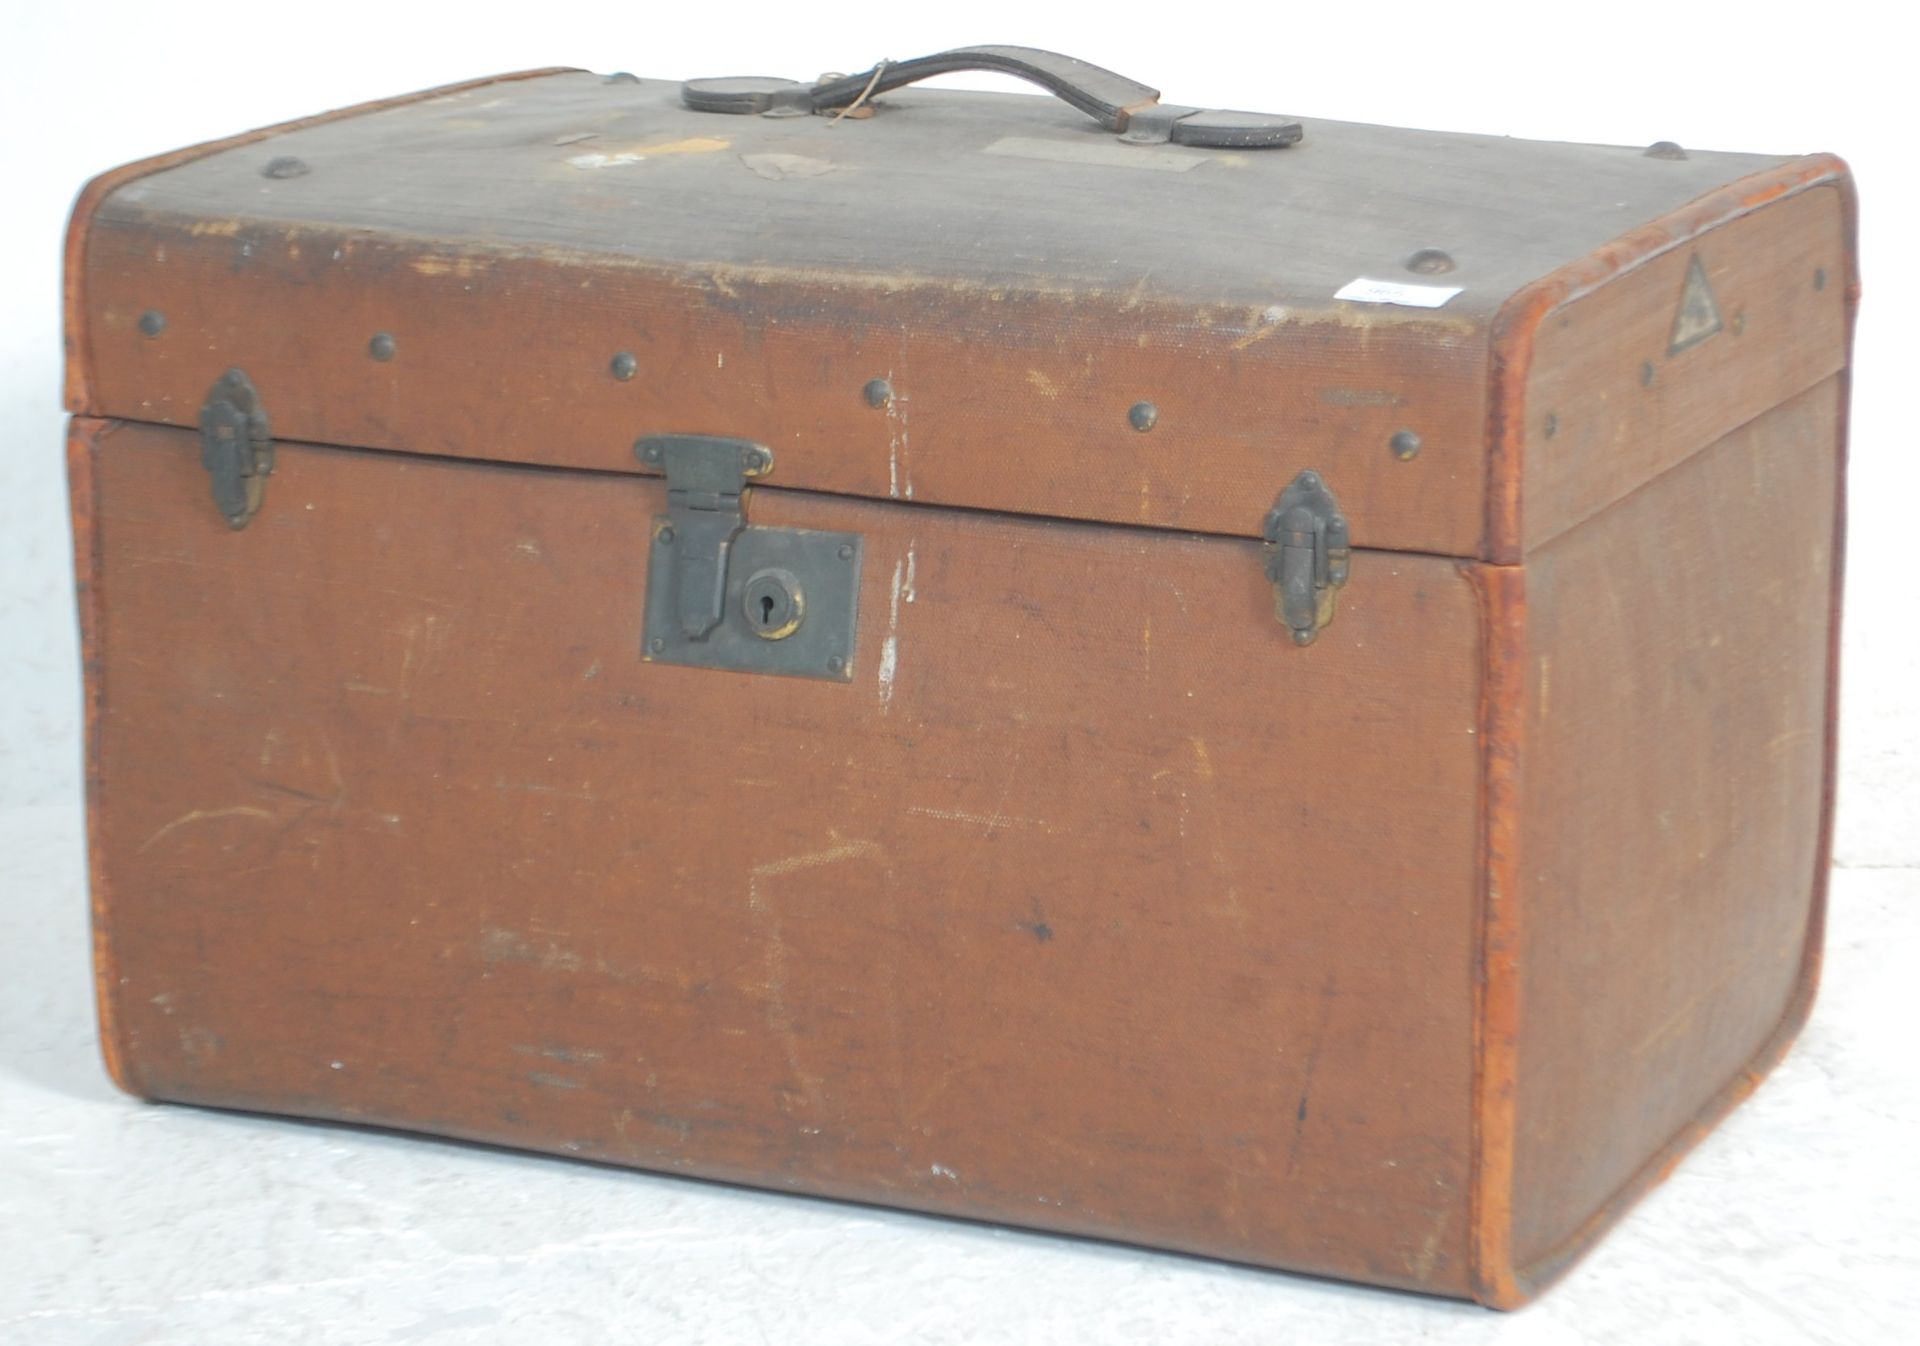 A vintage early 20th Century travelling trunk bound in brown canvas with painted initials WT and a